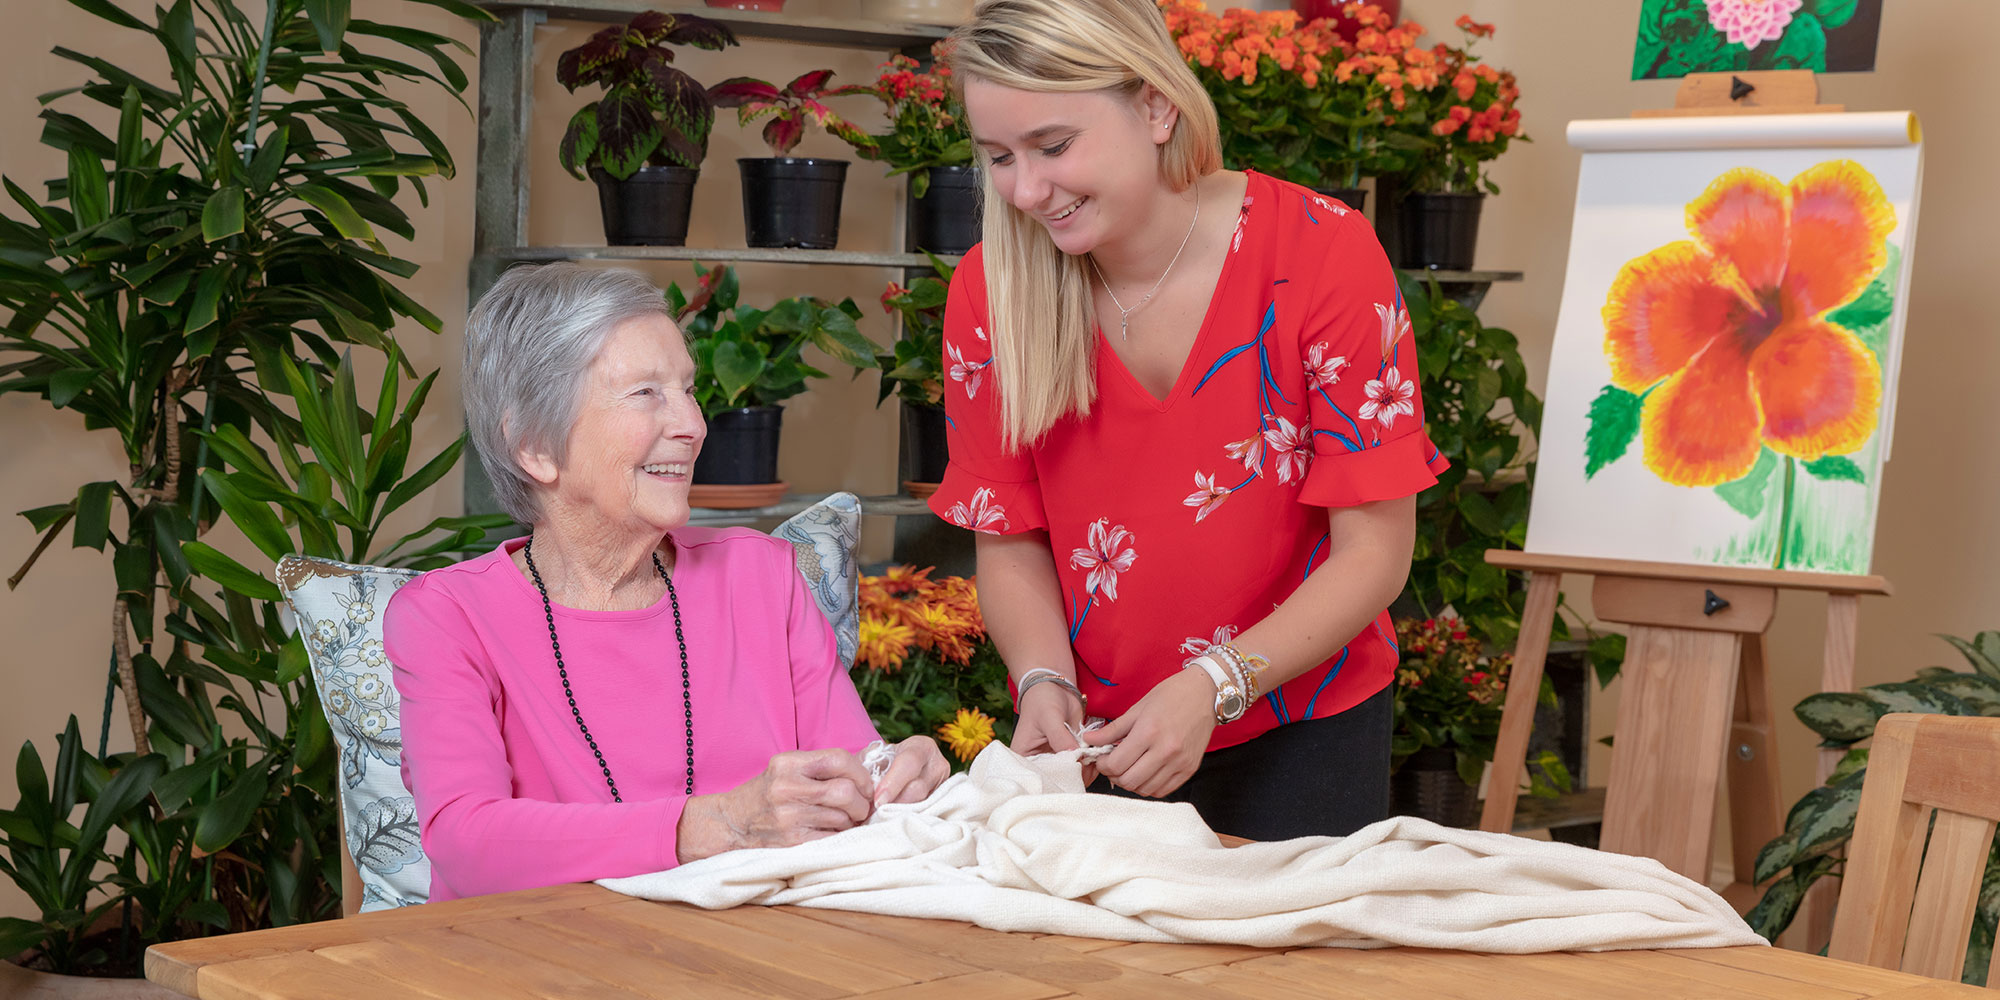 2 women working with a quilt and smiling